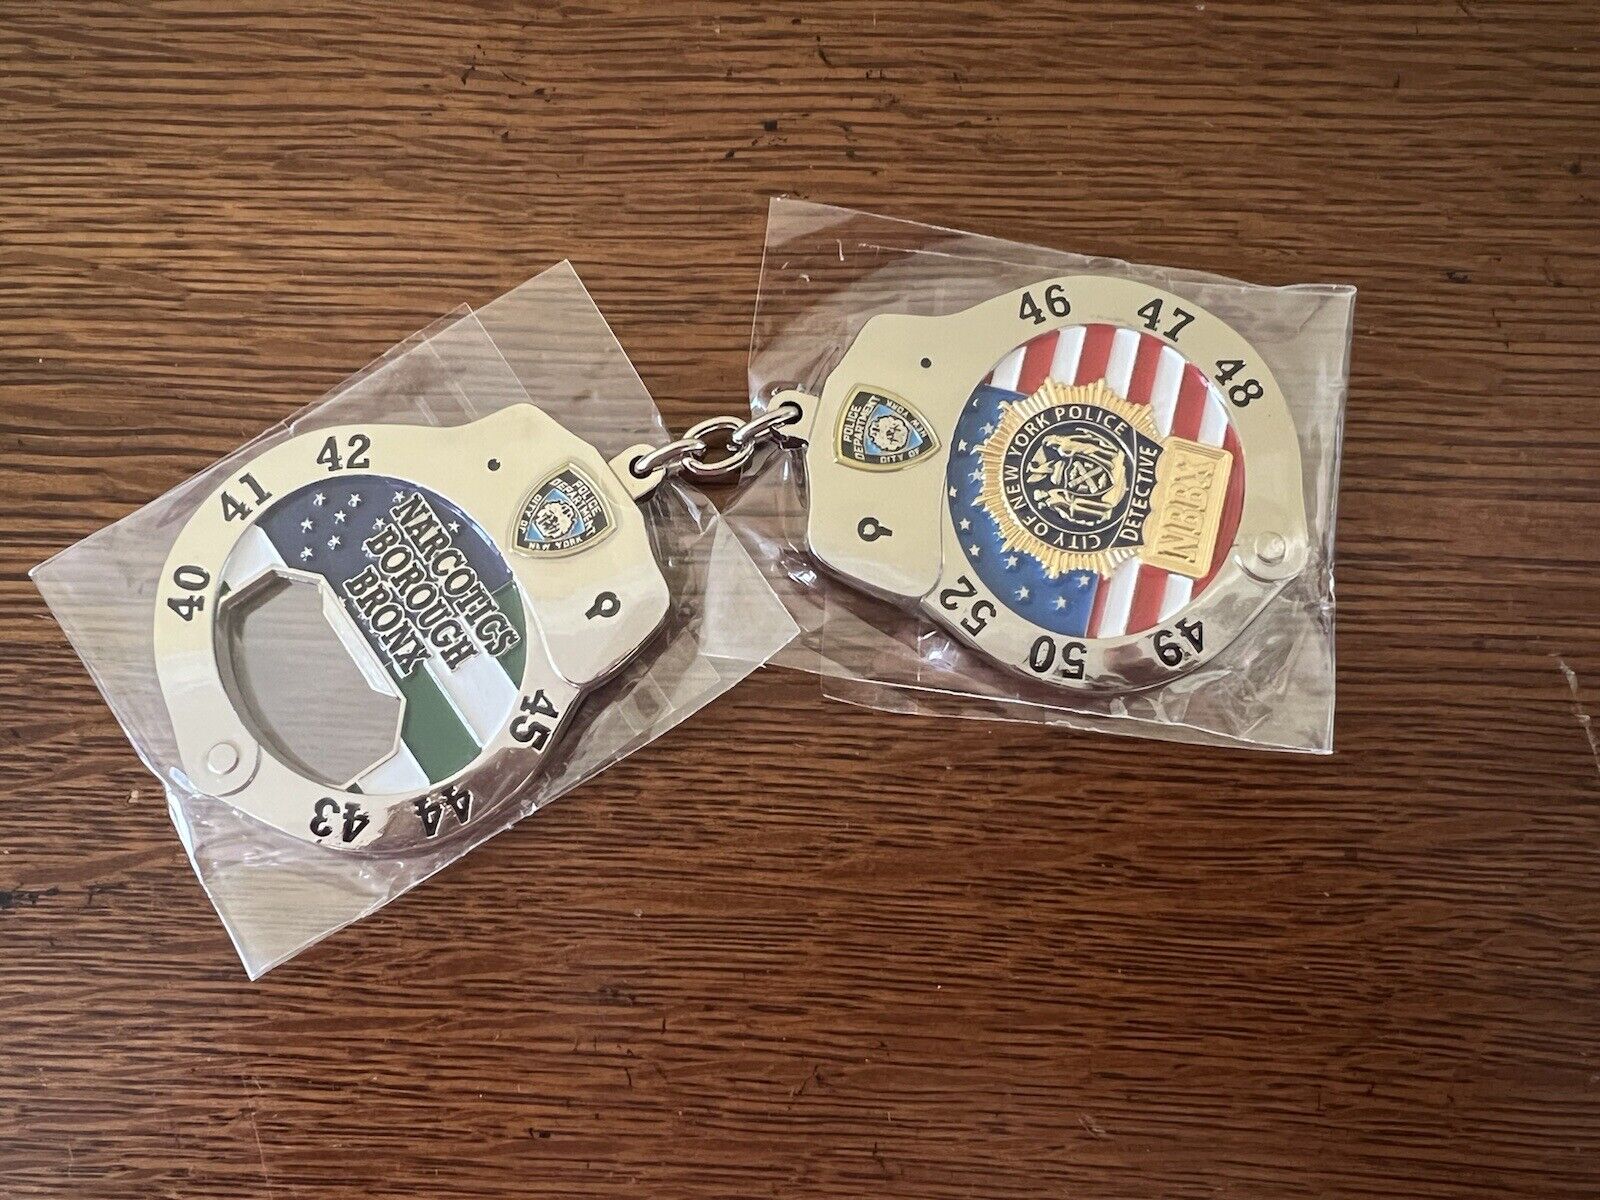 NYPD Bronx Borough Narcotics Detective Police Dept Challenge Coin Handcuffs